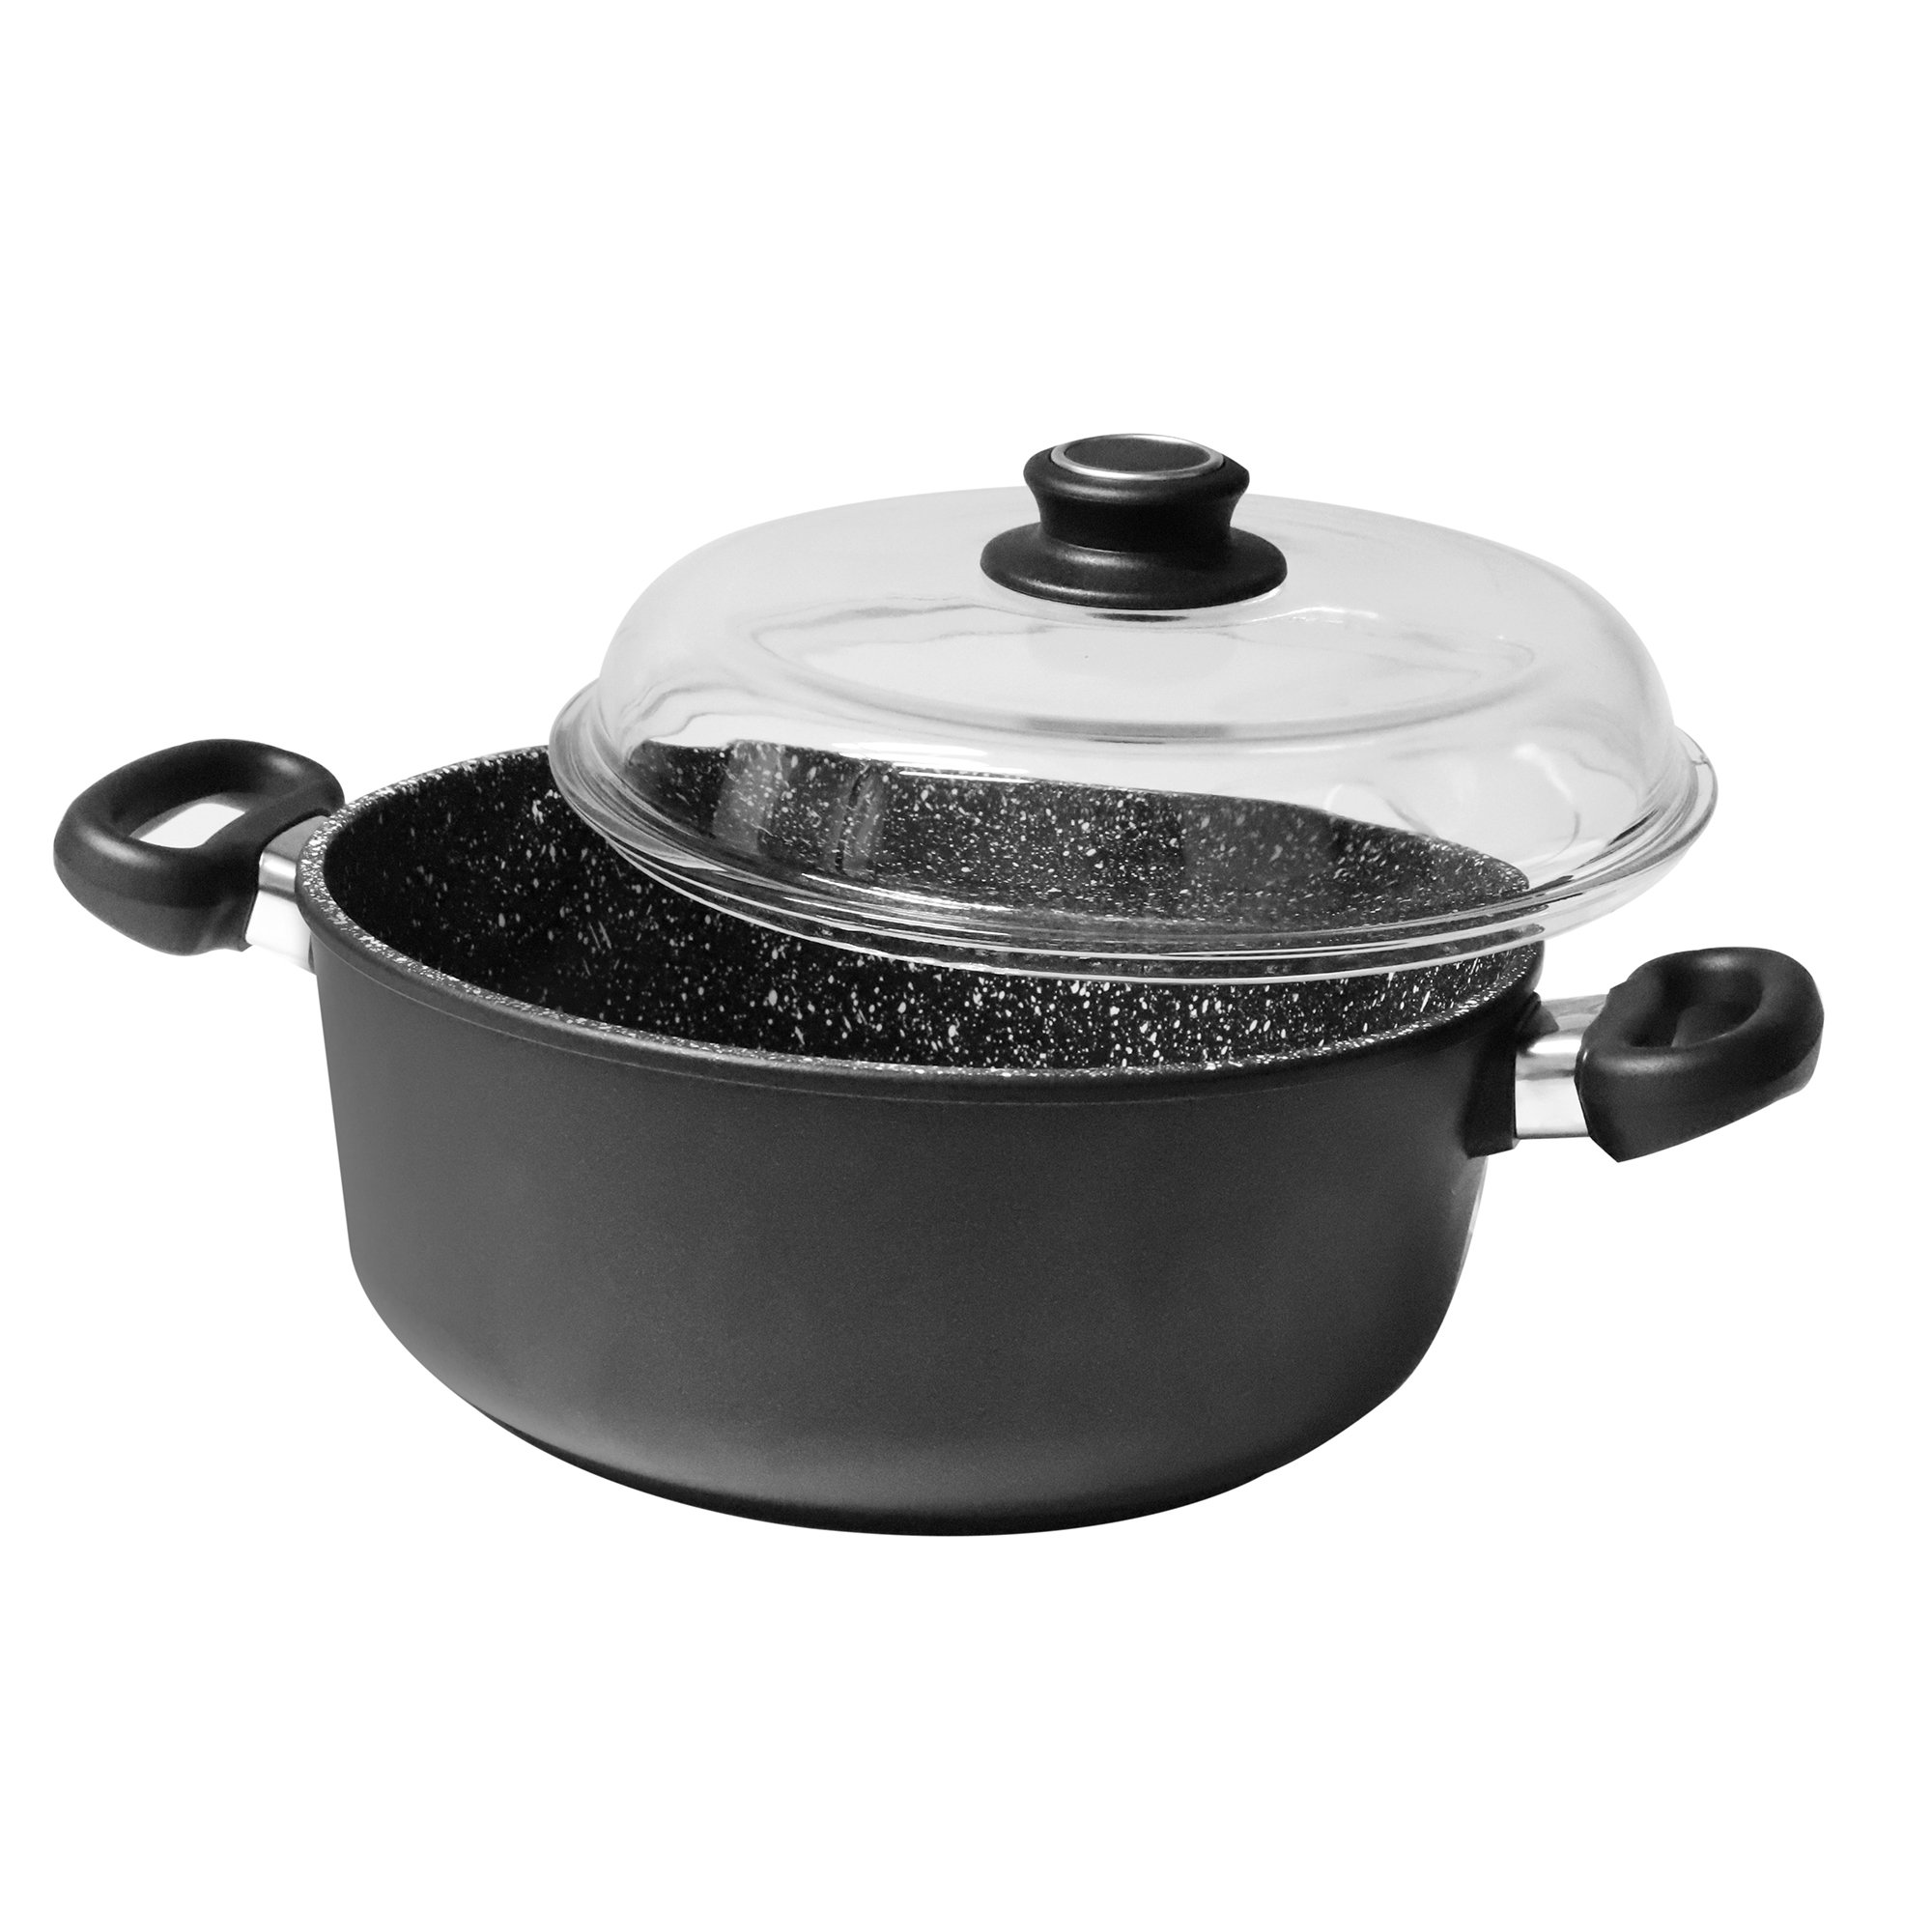 STONELINE® Cooking Pot 24 cm | Made in Germany